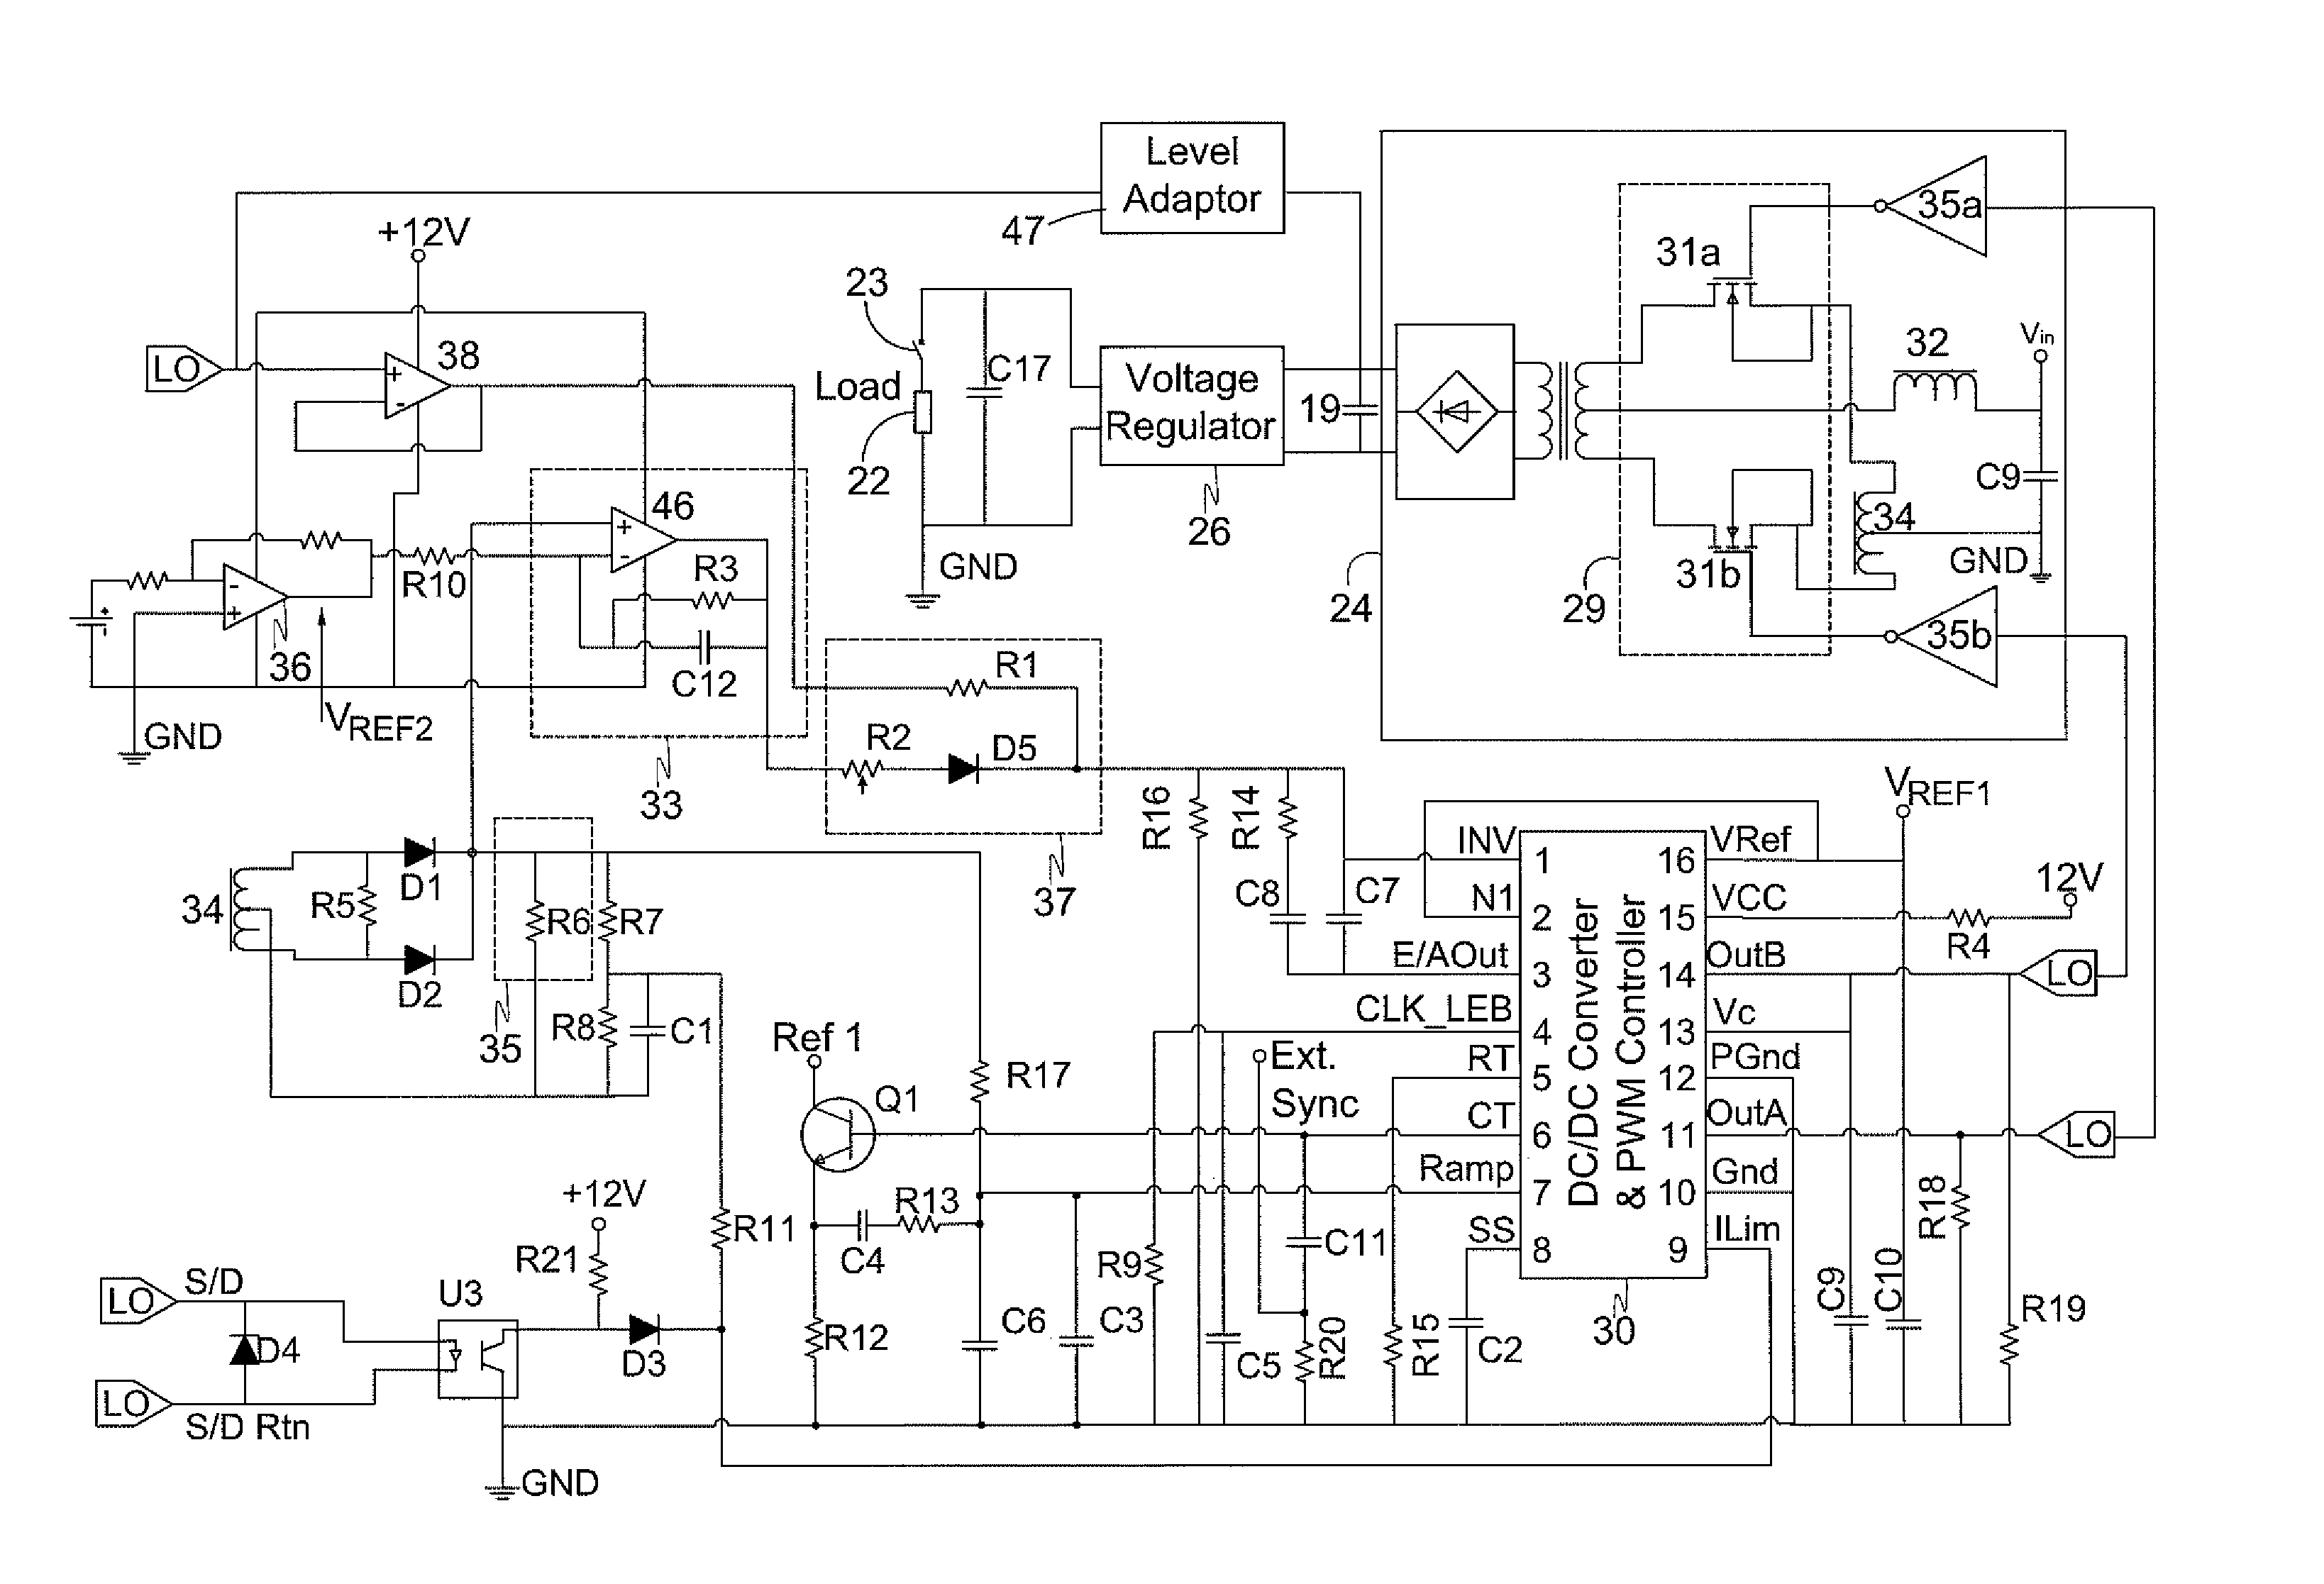 Power array for high power pulse load